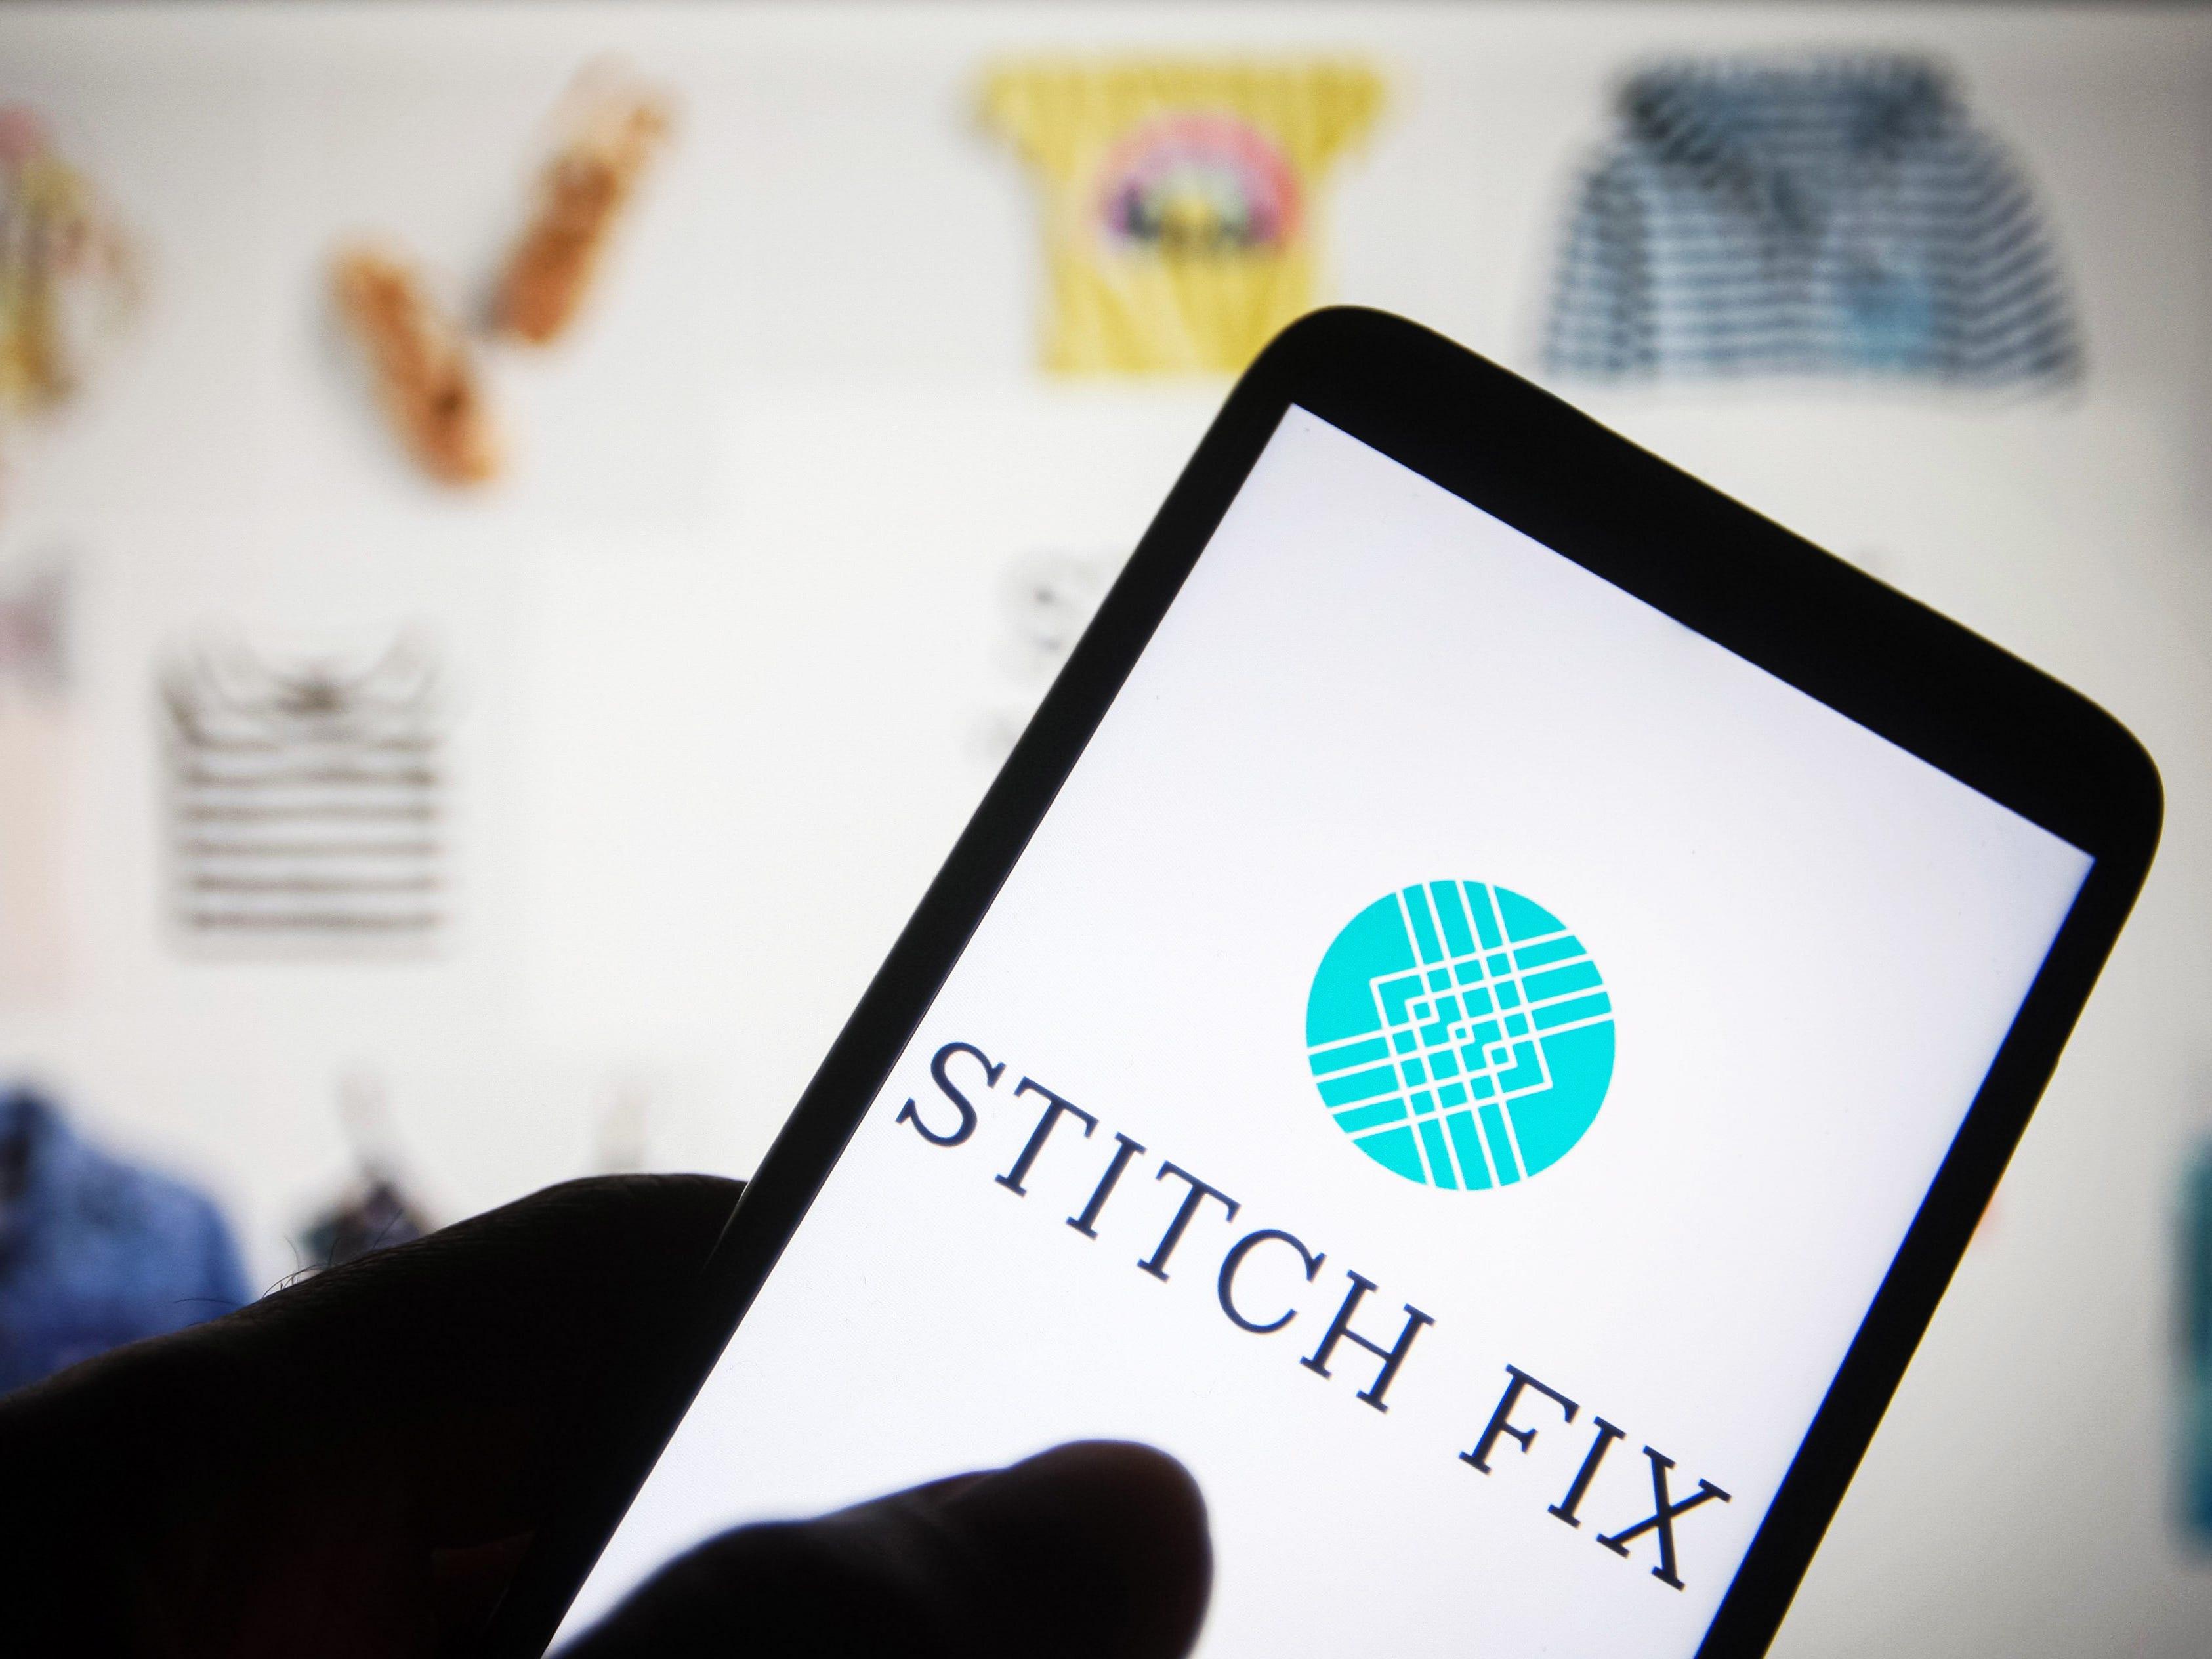 <p>Stitch Fix announced on Jan. 5 that it plans to slash 20% of its salaried workforce, <a href="https://www.wsj.com/articles/stitch-fix-cutting-20-of-salaried-jobs-ceo-stepping-down-11672931816" rel="noopener">the Wall Street Journal reported.</a></p><p>The cuts come in tandem with the announcement that CEO Elizabeth Spaulding is stepping down, after less than a year at the helm of the struggling retail company.</p><p align="justify">"First as president and then as CEO, it has been a privilege to lead in an unprecedented time, and to chart the course for the future with the Stitch Fix team," Spaulding said in a statement. "It is now time for a new leader to help support the next phase."</p><p align="justify">Stitch Fix founder Katrina Lake — who formerly served as chief executive and sits on the board of directors — will become interim CEO, the company said in a <a href="https://investors.stitchfix.com/news-releases/news-release-details/stitch-fix-announces-elizabeth-spaulding-will-step-down-chief">press release</a>. </p>